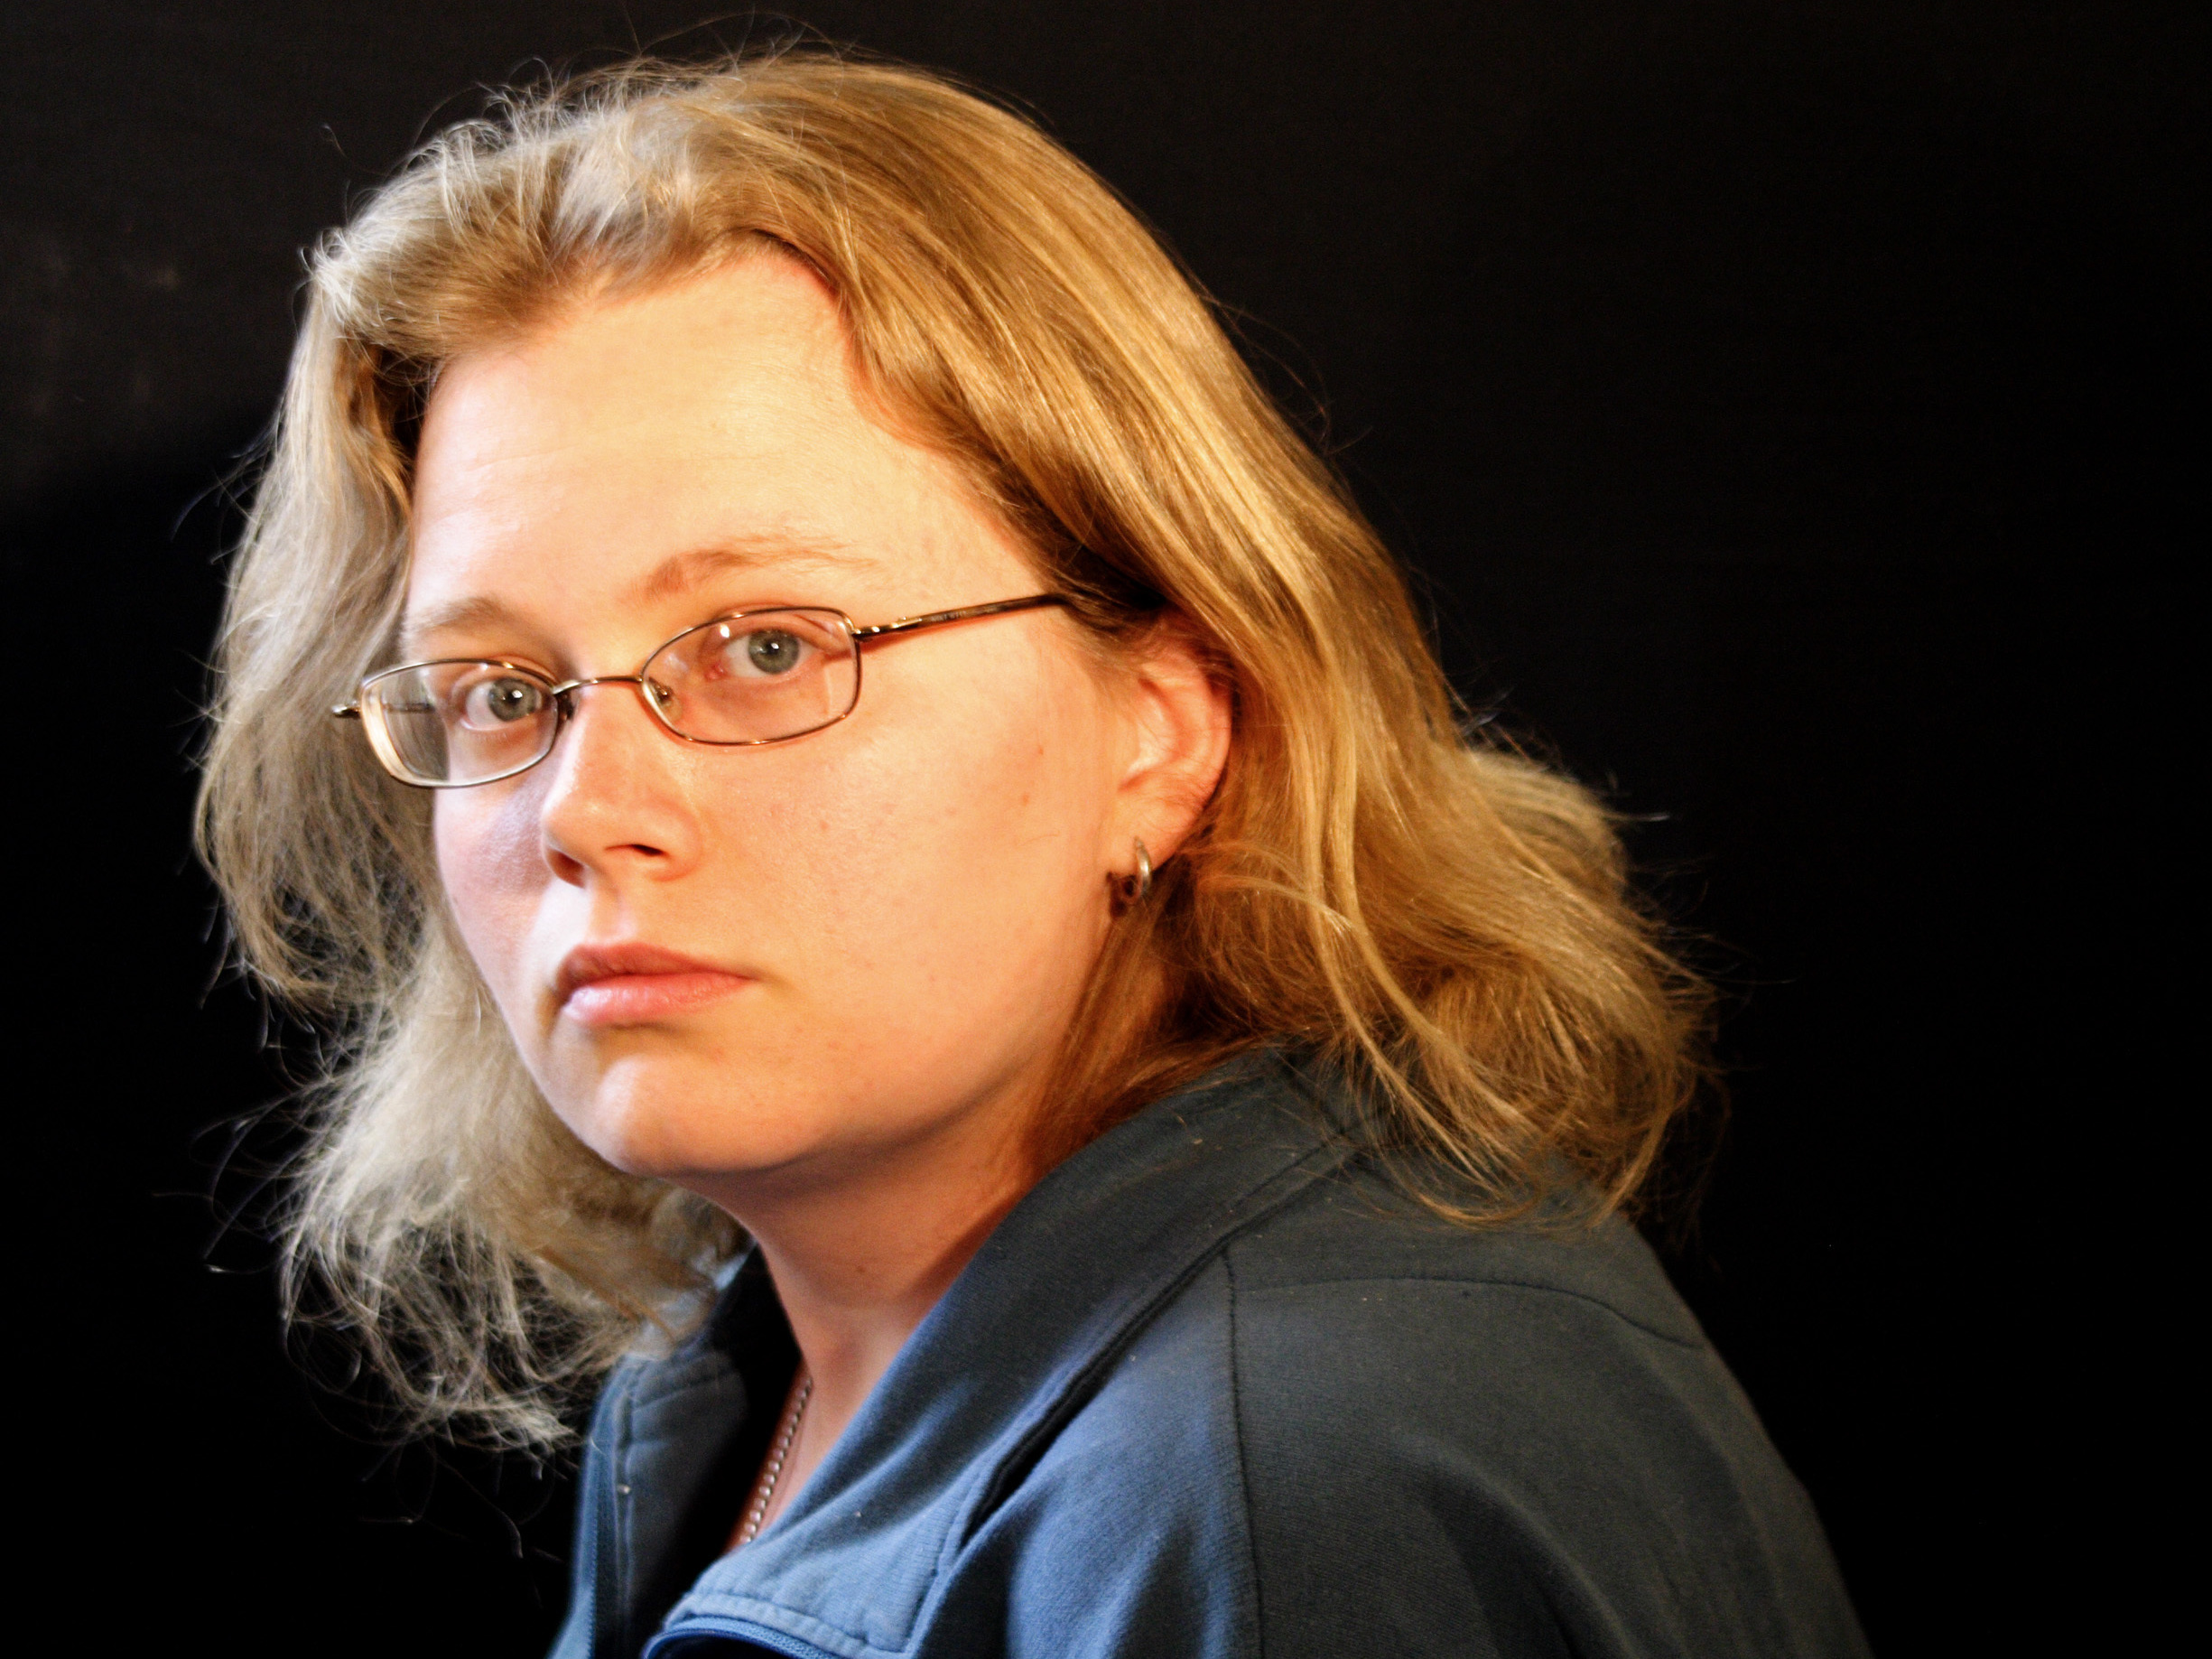 Queer Horror and Science Fiction author Seanan McGuire
Mira Grant